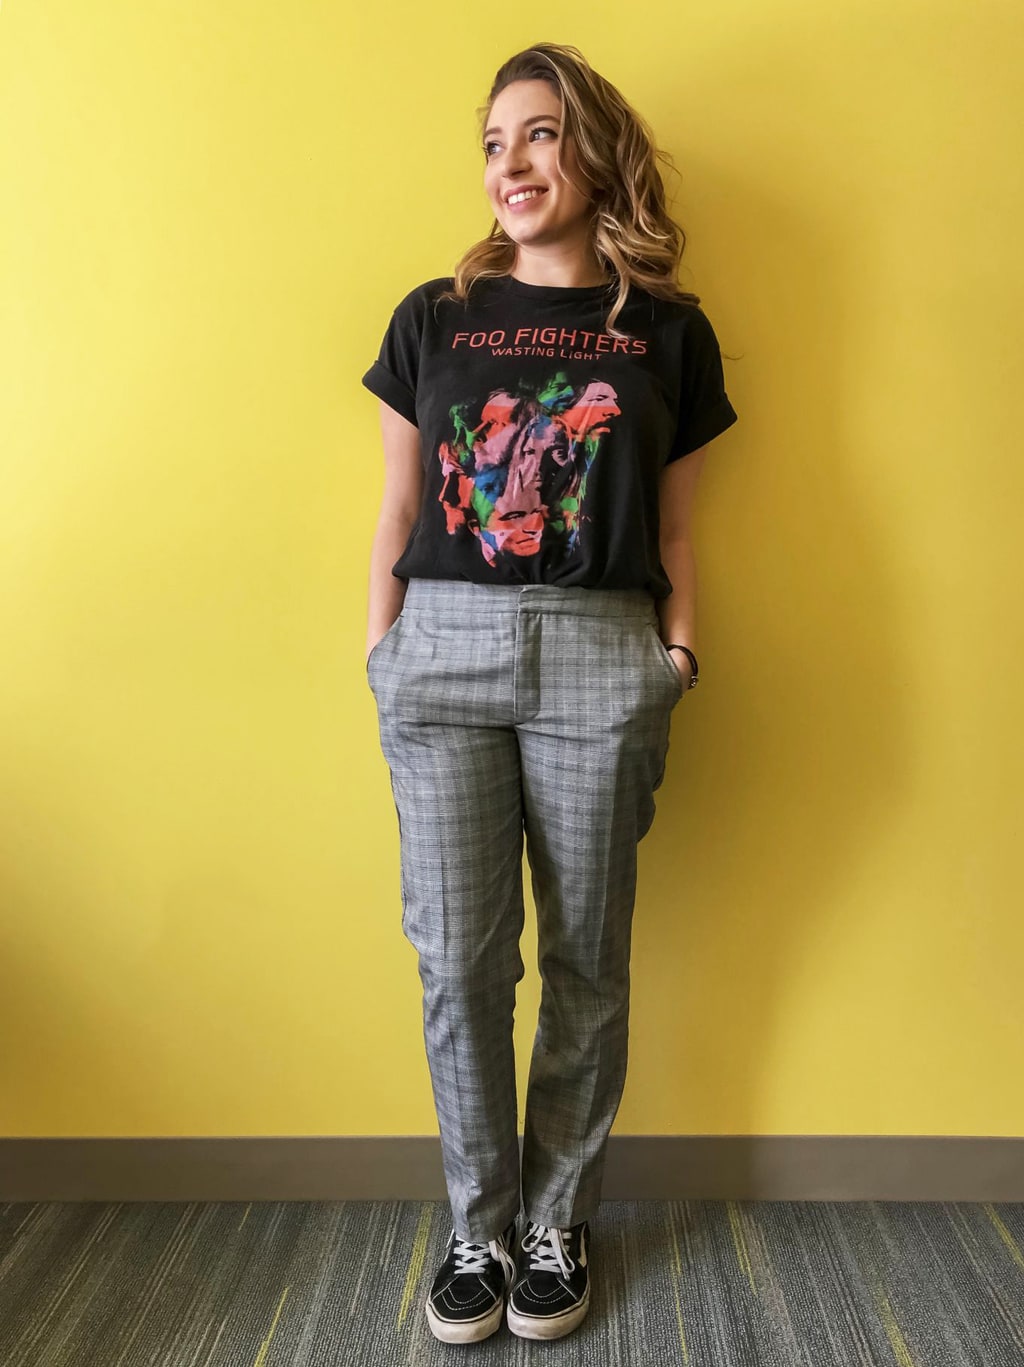 UMass Amherst student style: Caroline wears a vintage short sleeved Foo Fighters tee with a pair of plaid grey trousers and black and white Vans.